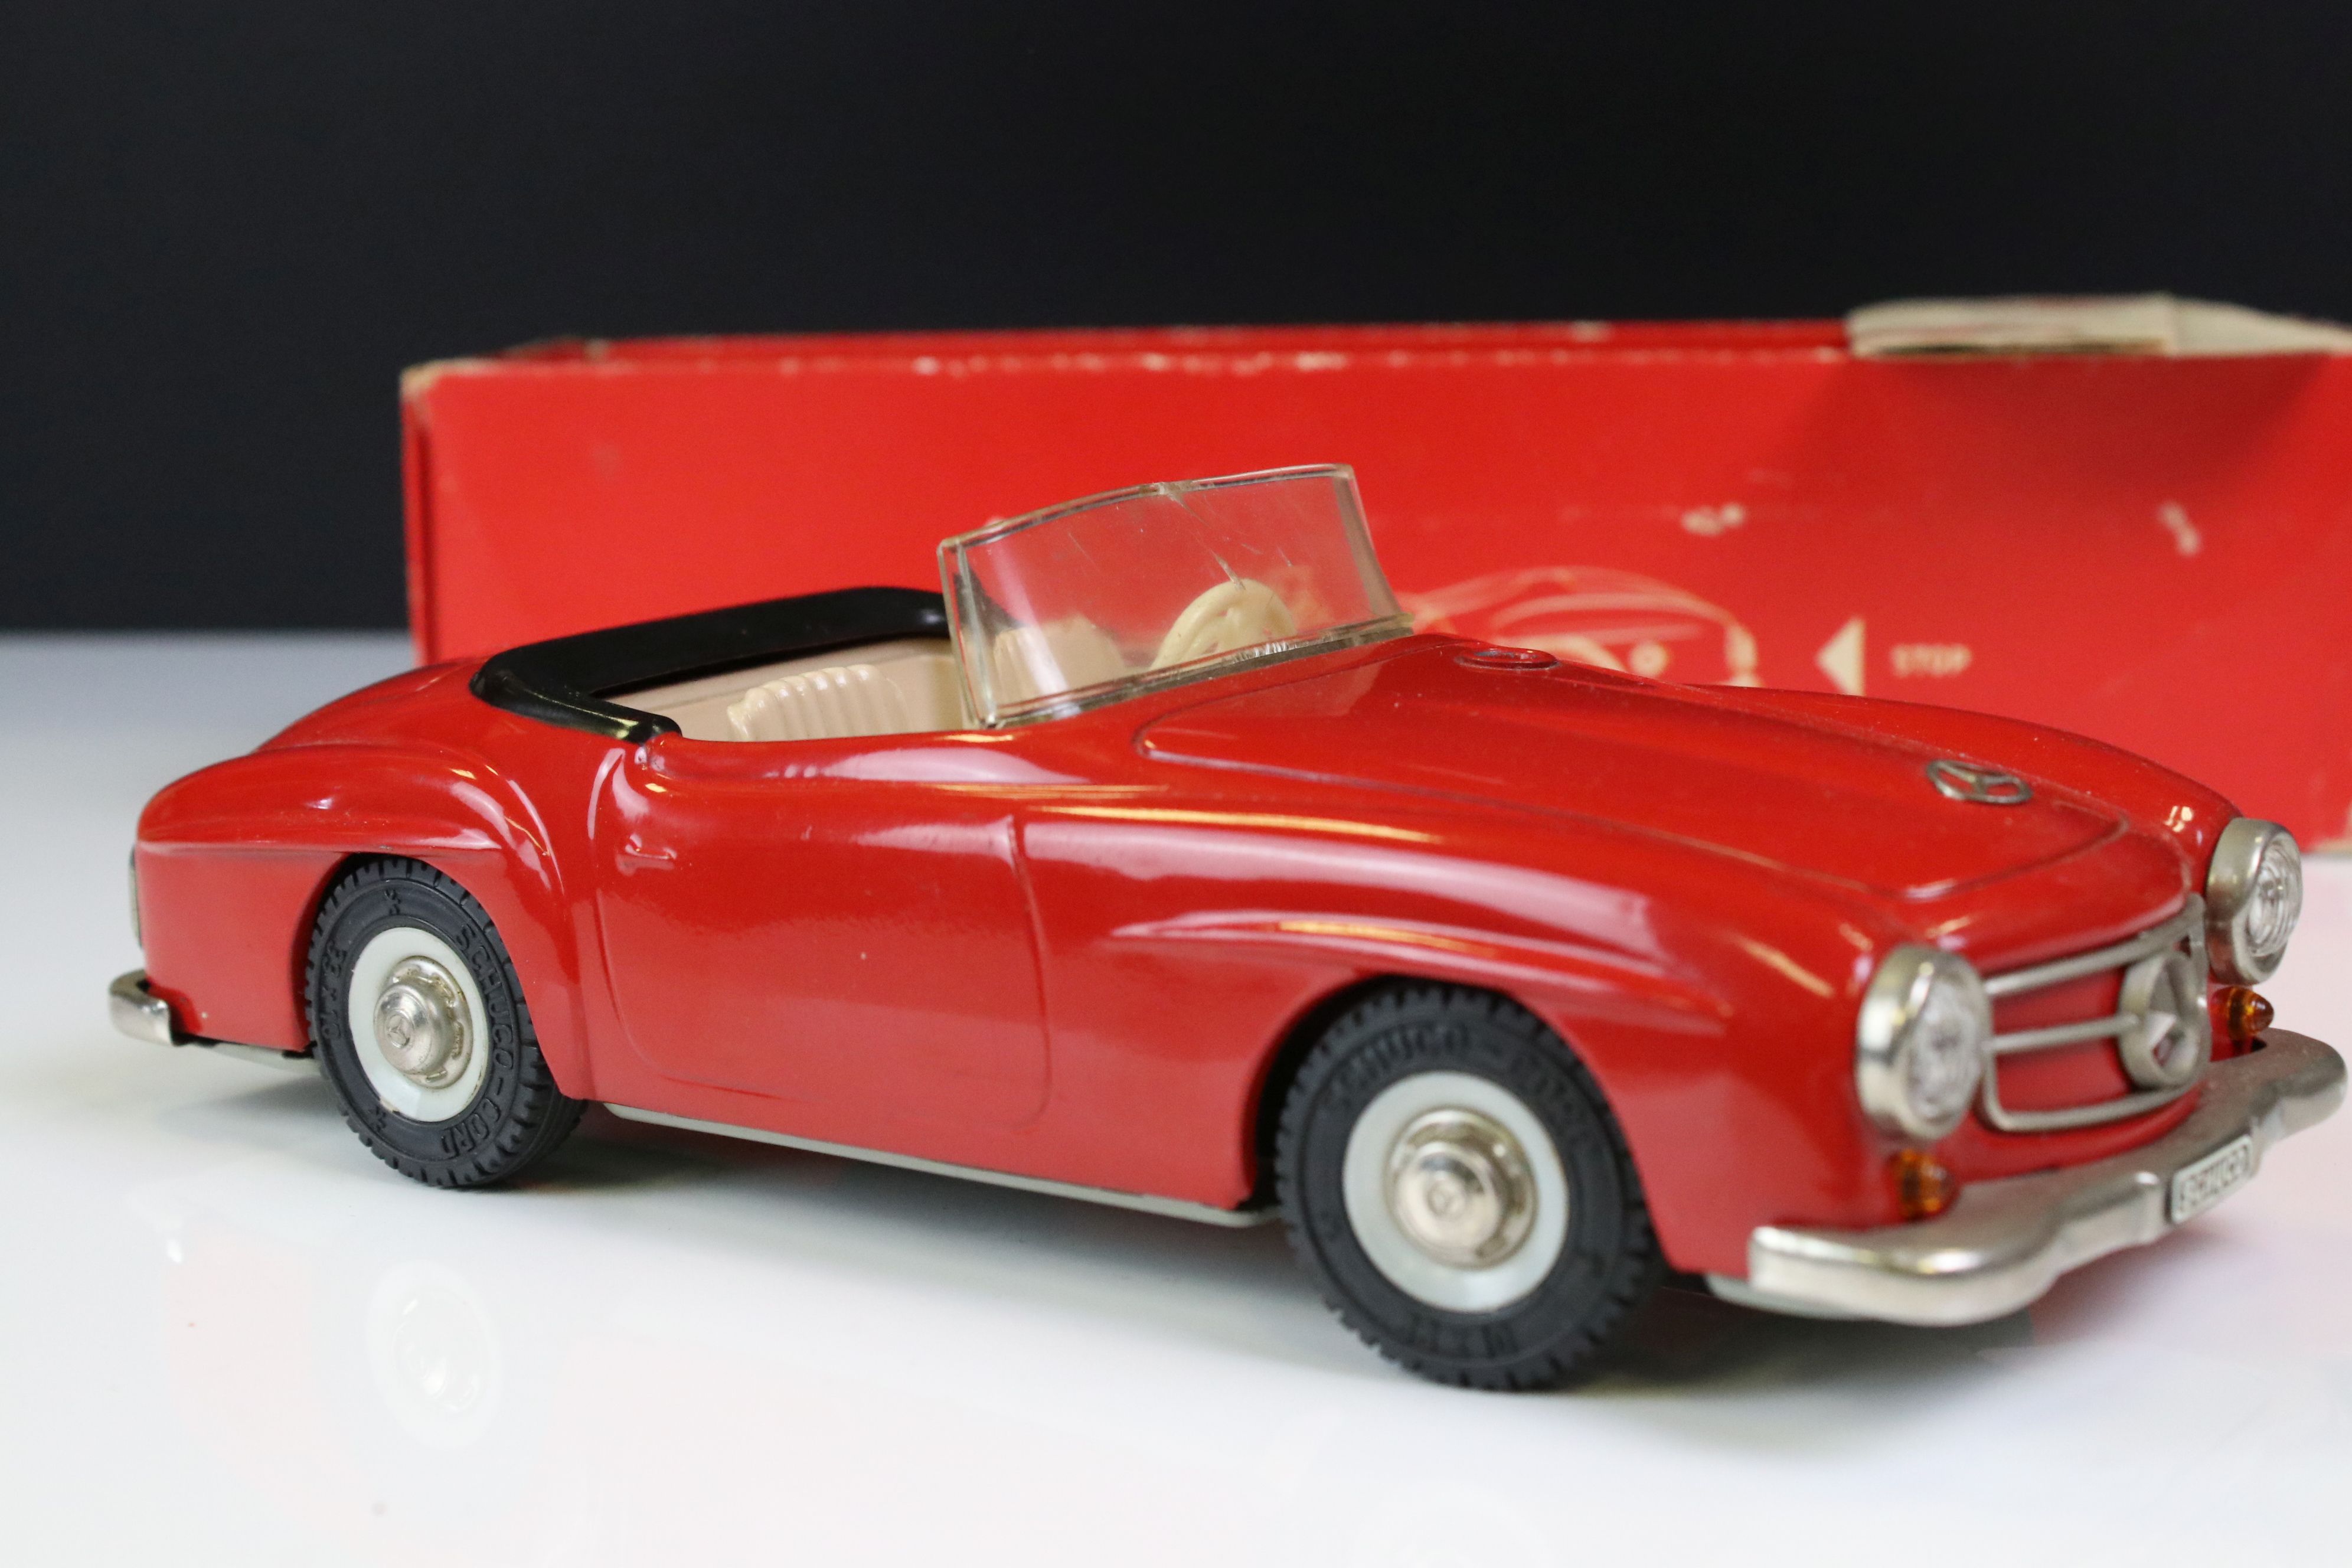 Schuco Clockwork tinplate remote control 2095 Mercedes 190 SL in red, with instructions and box tray - Bild 3 aus 9